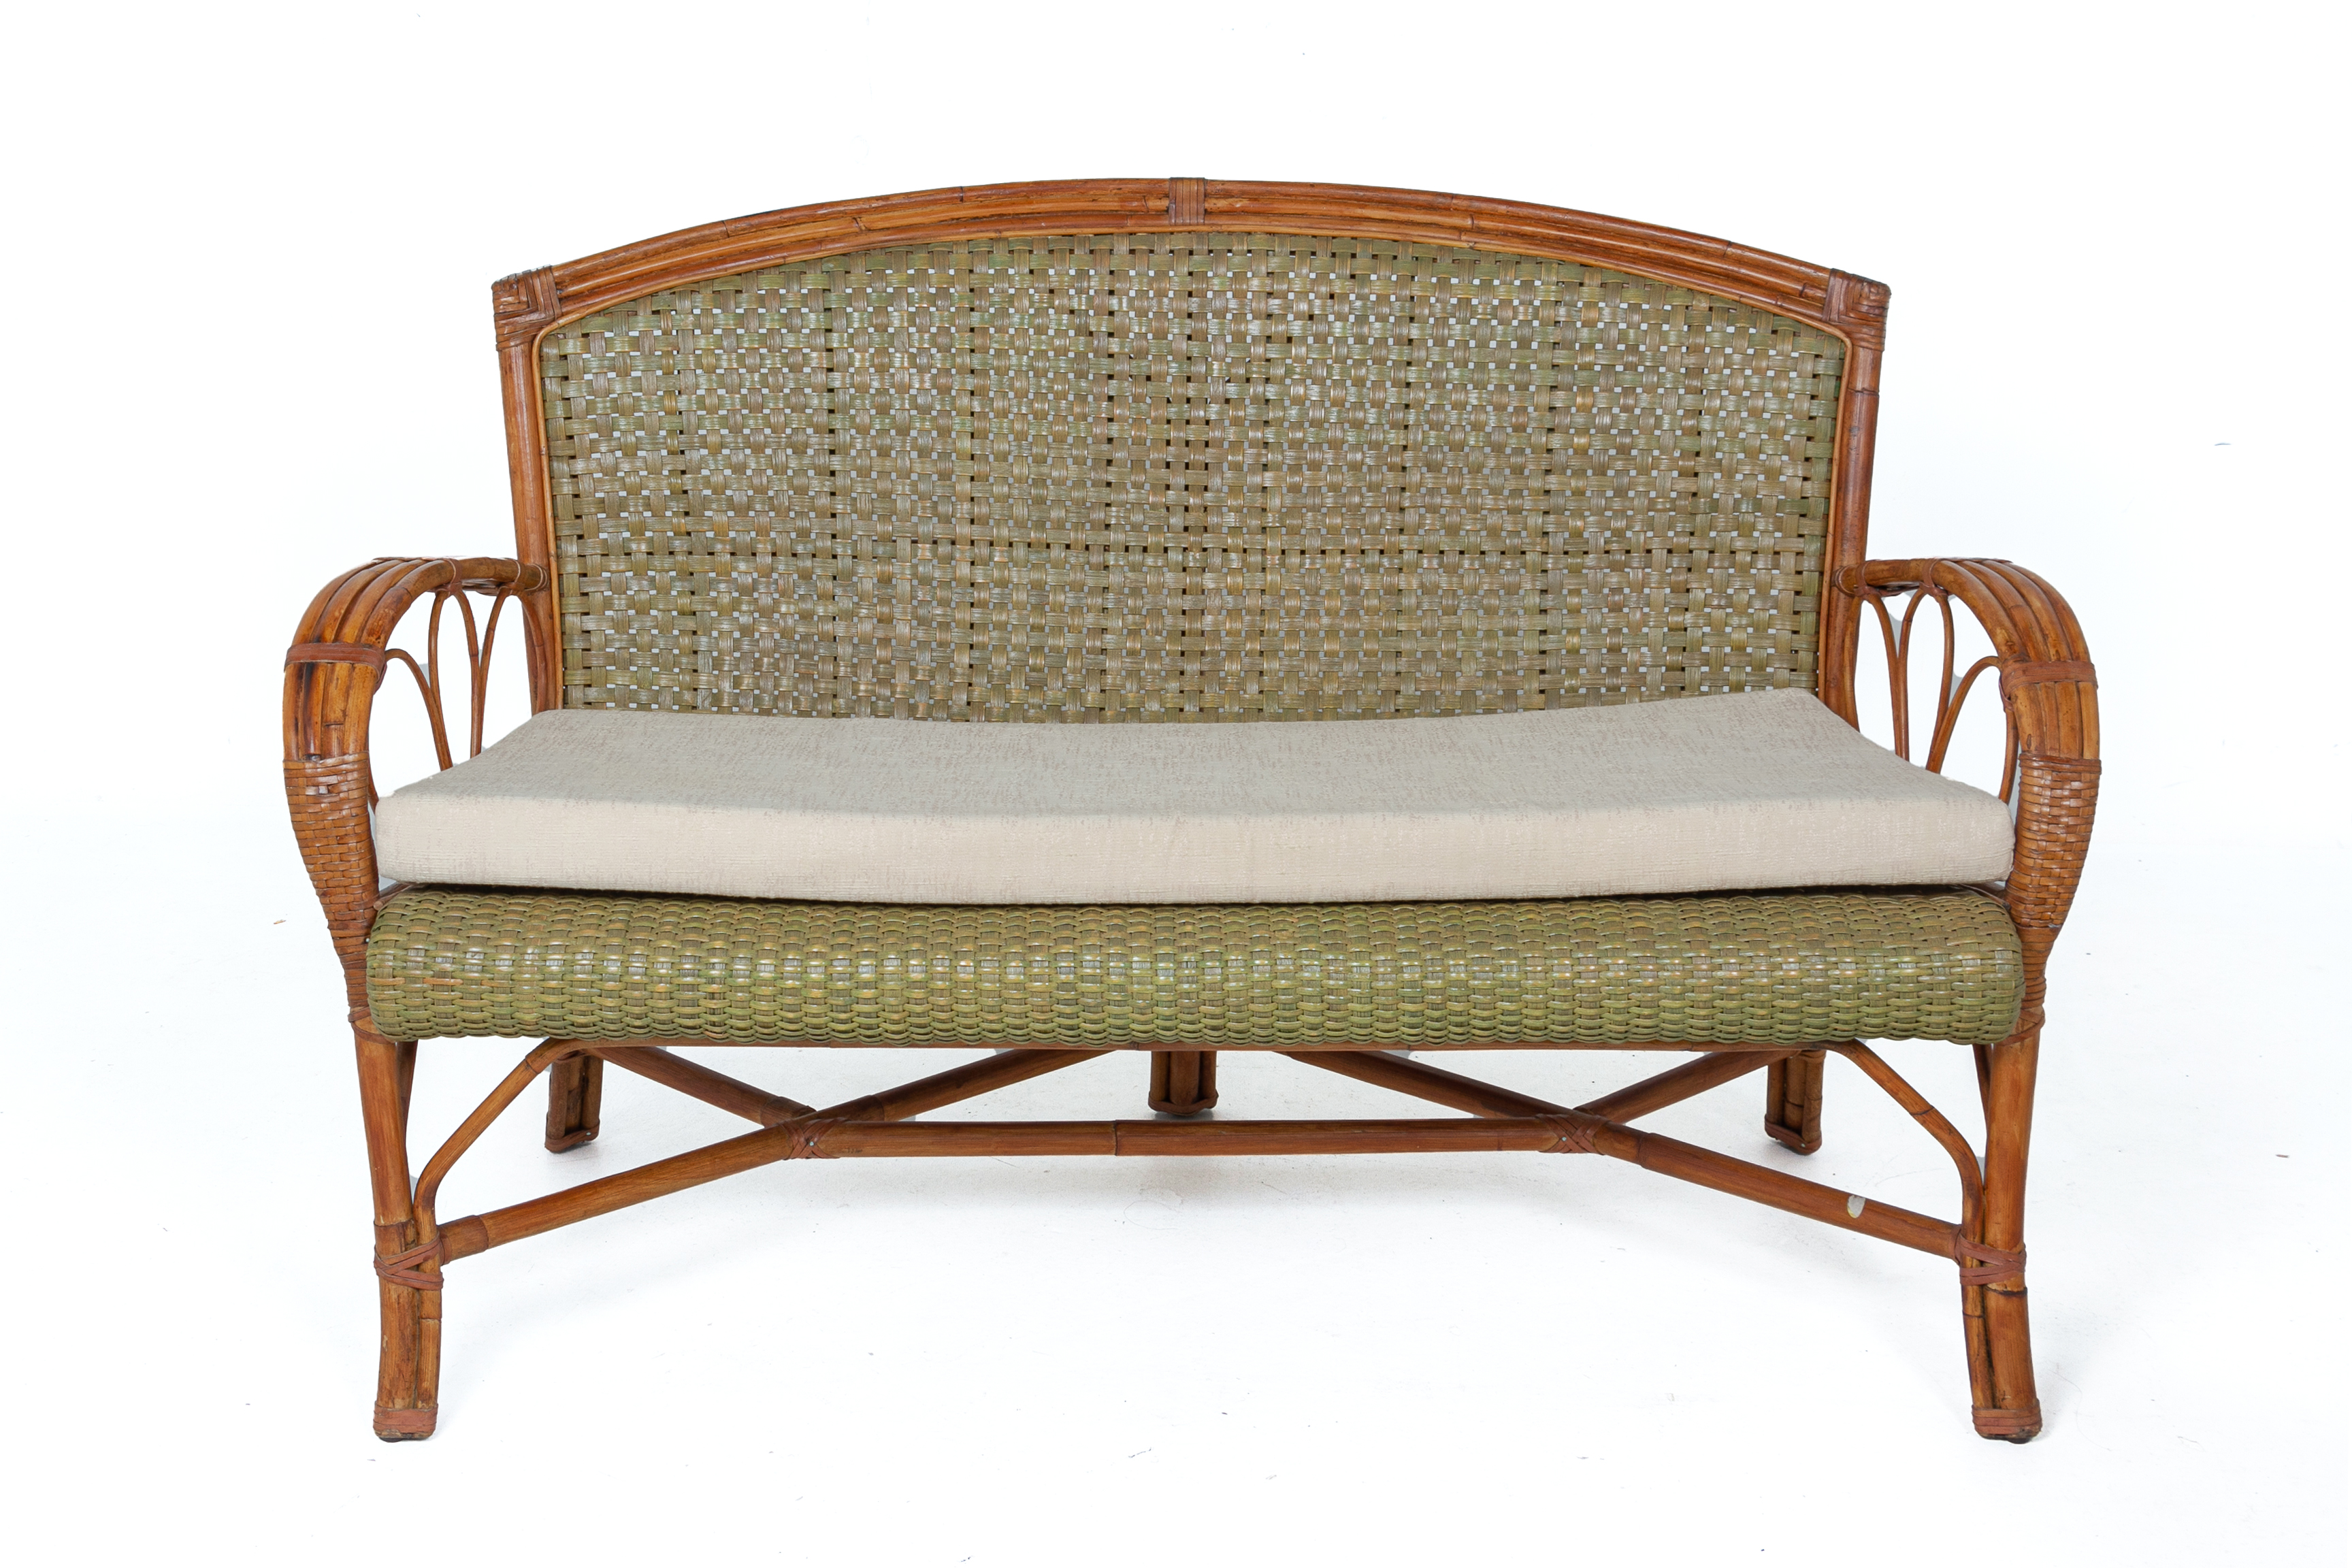 A BAMBOO CANED FOUR PIECE FURNITURE SUITE - Image 6 of 6